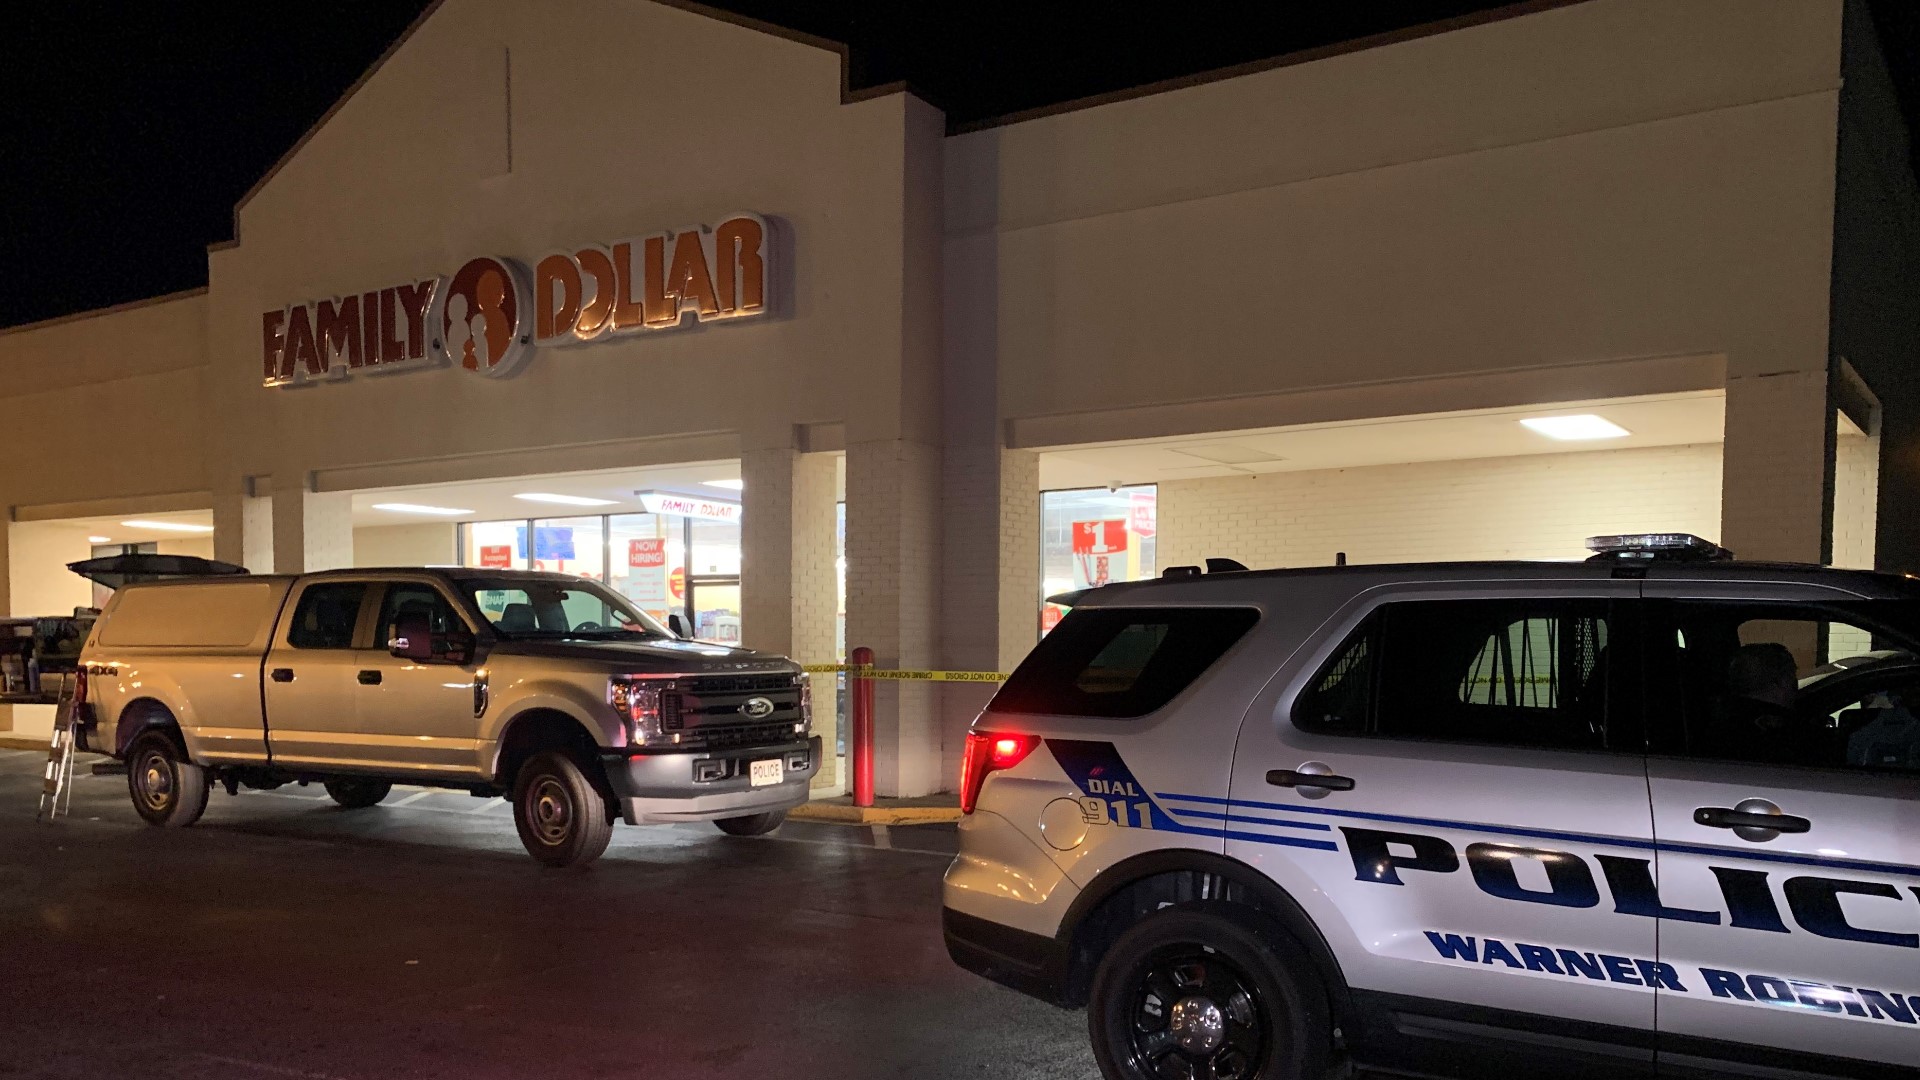 Around 9:30 p.m., officers were called to the Family Dollar at 873 North Houston Road